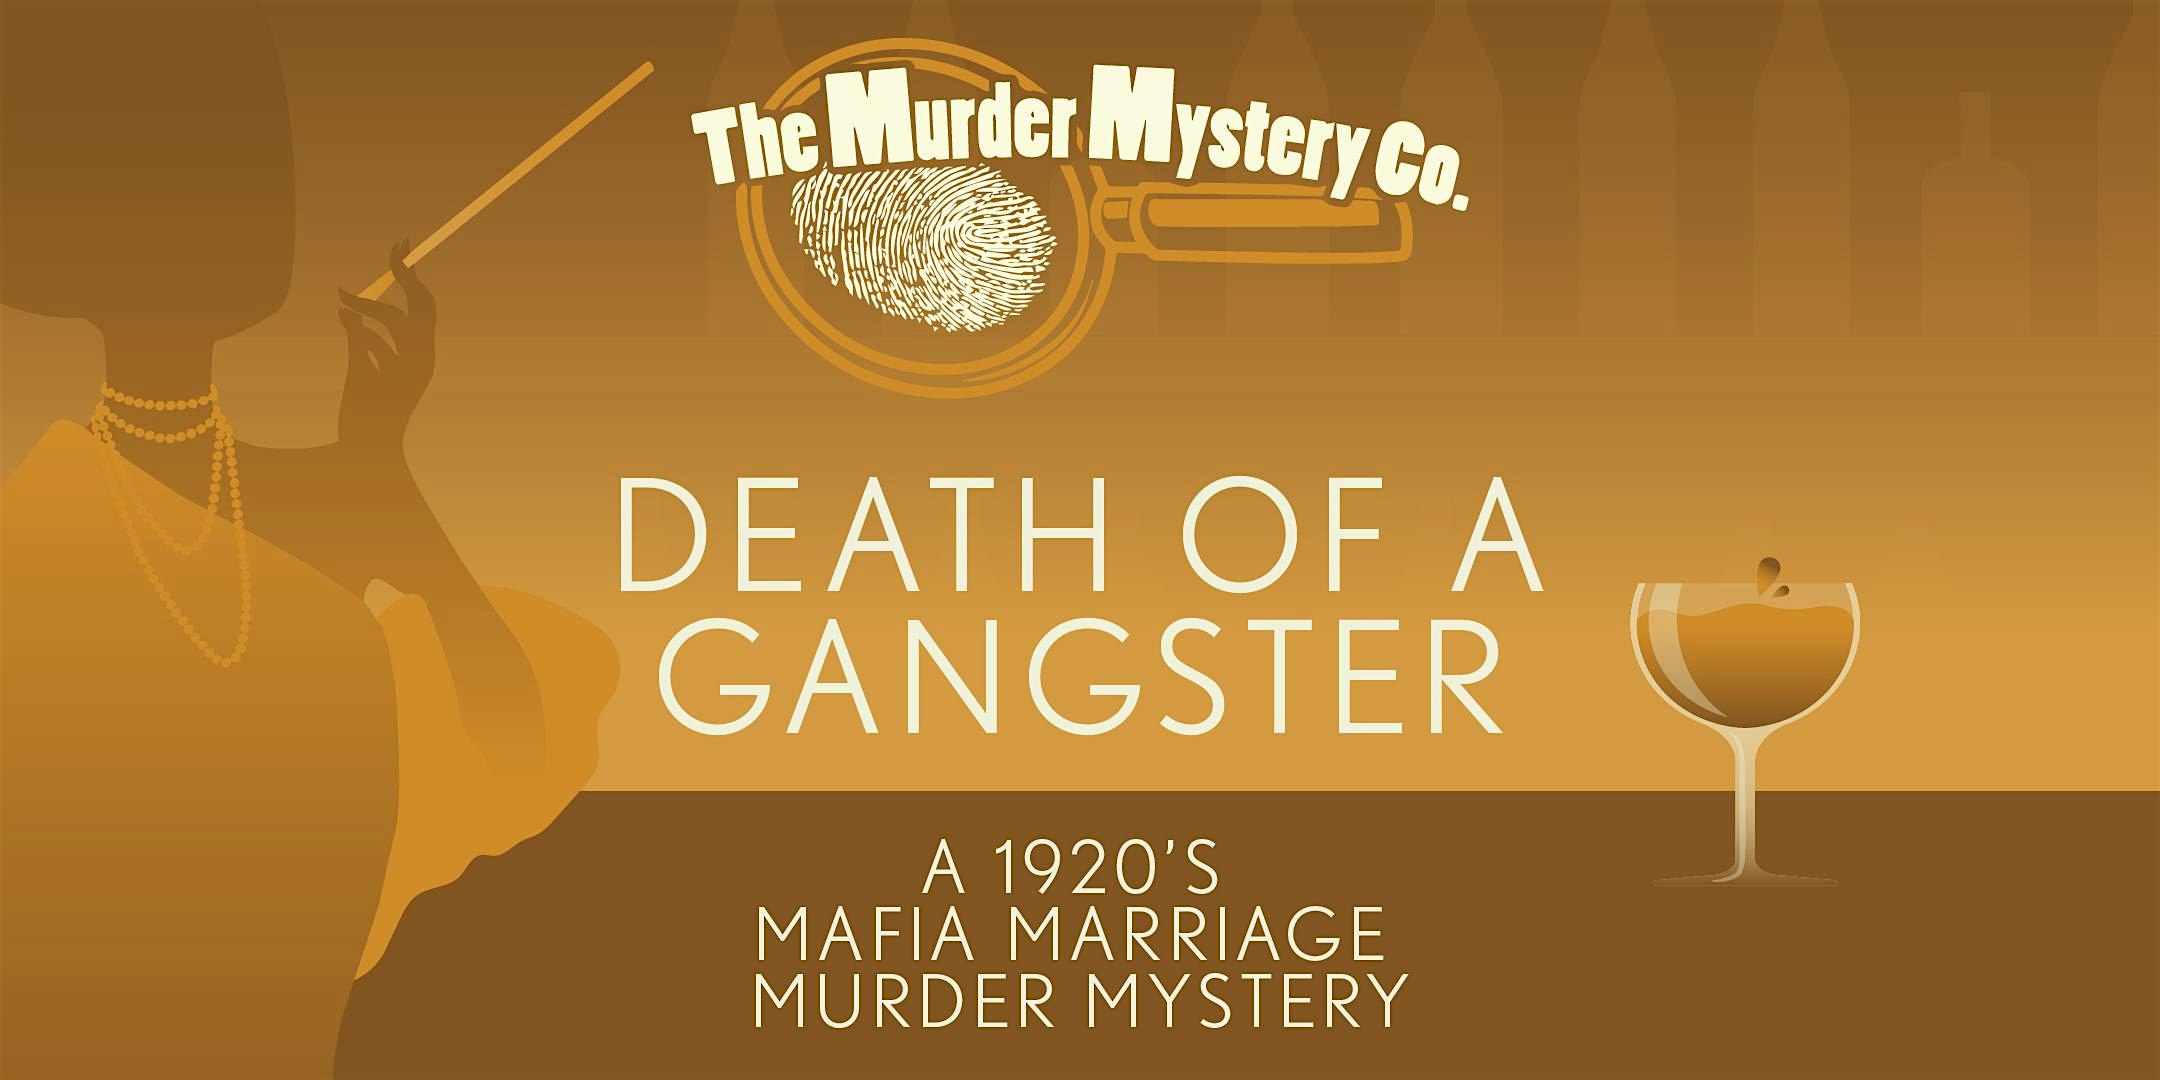 Murder Mystery Dinner Theater Show in Detroit: Death of a Gangster